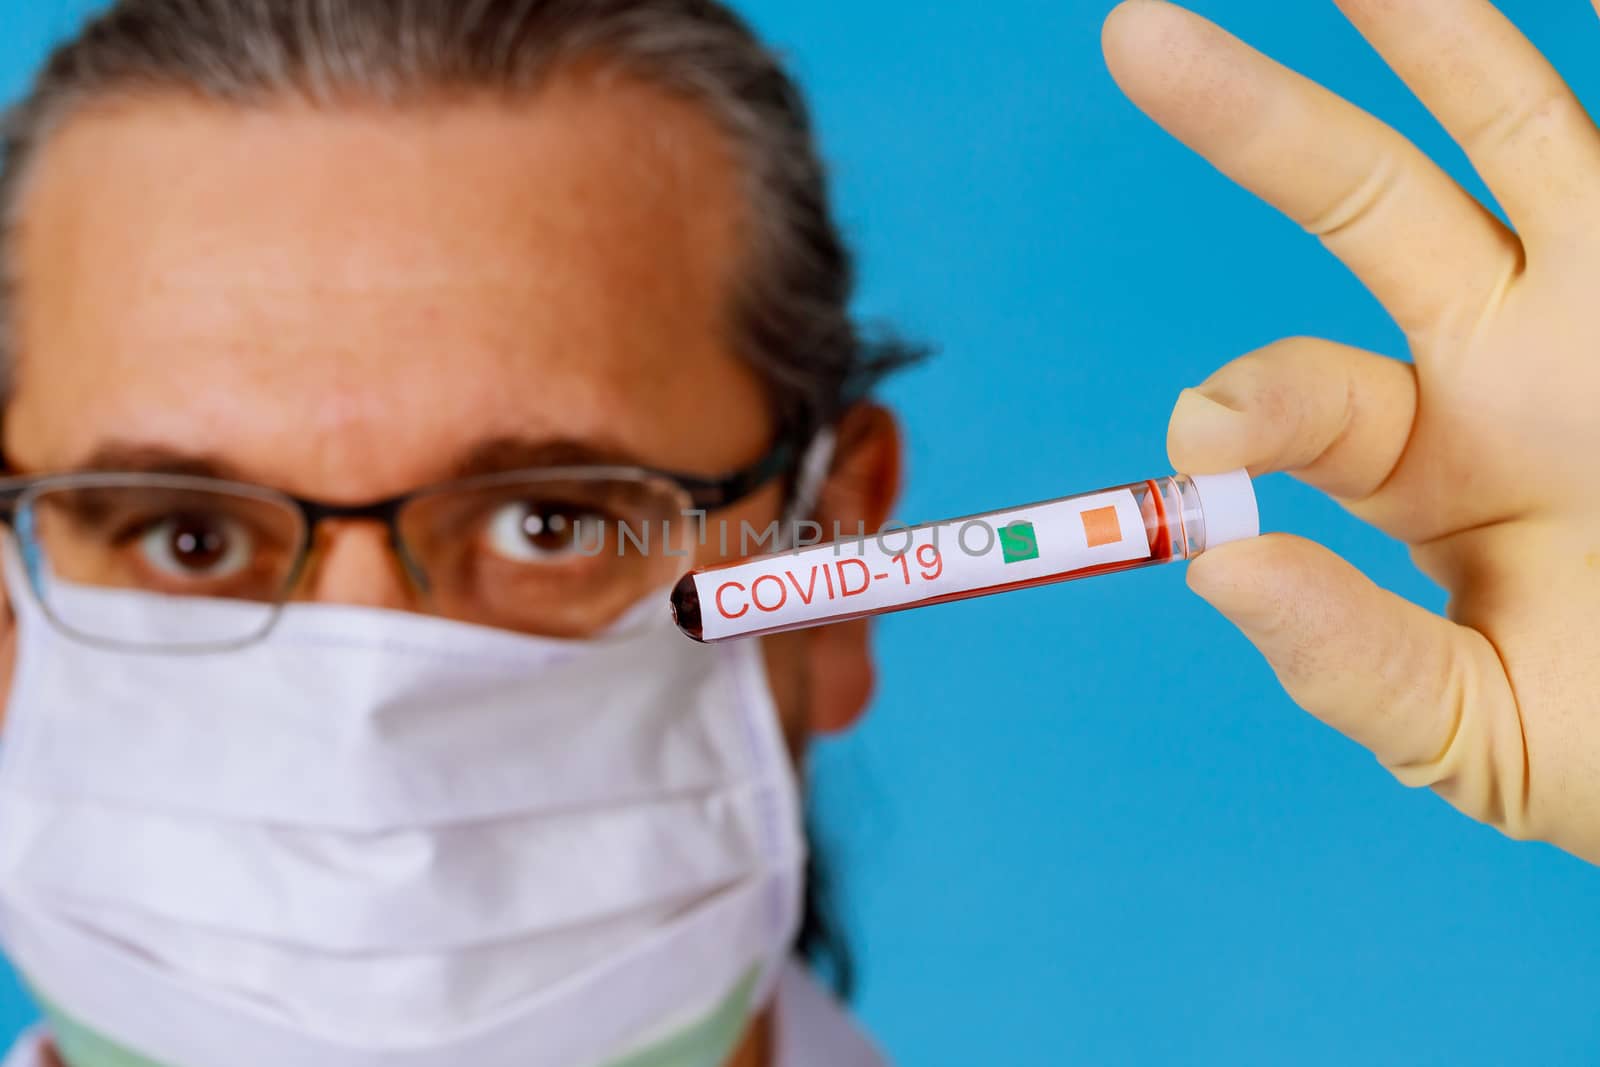 Coronavirus Covid 19 infected blood sample in sample tube in hand of doctor in face mask